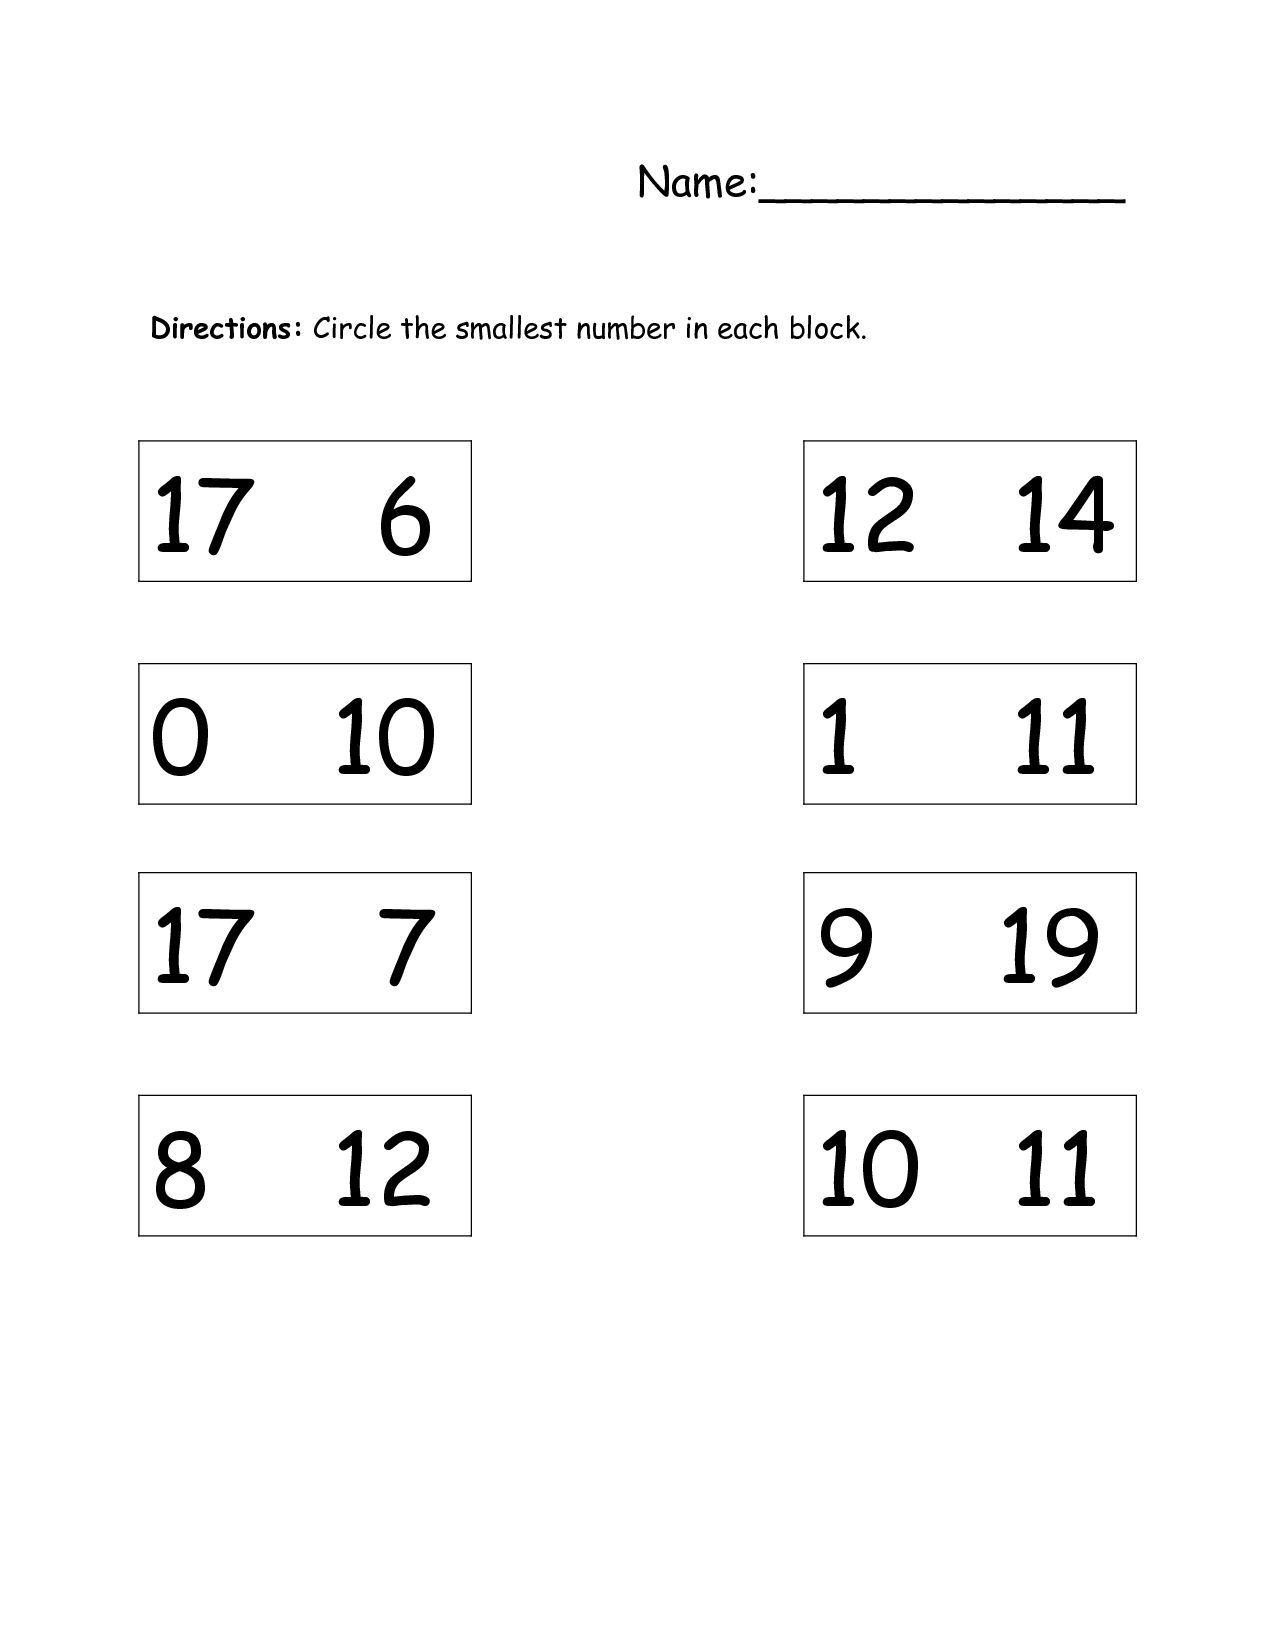 13 Best Images of Directions Spanish Worksheet - Cardinal Direction